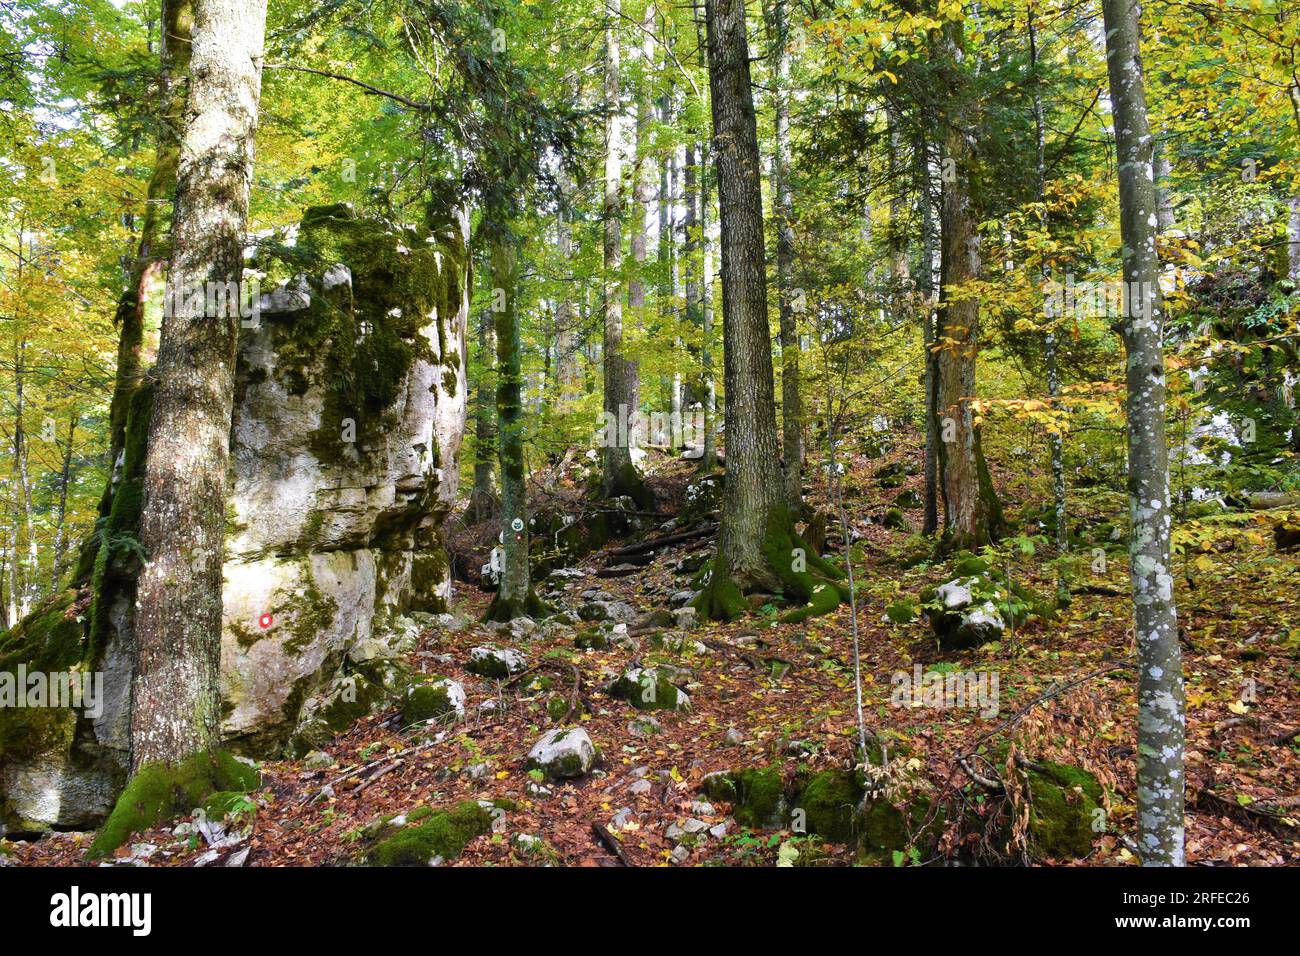 Mixed broadleaf and coniferous forest with beech (Fagus sylvatica) and silver fir (Abies alba) trees and a large rock Stock Photo